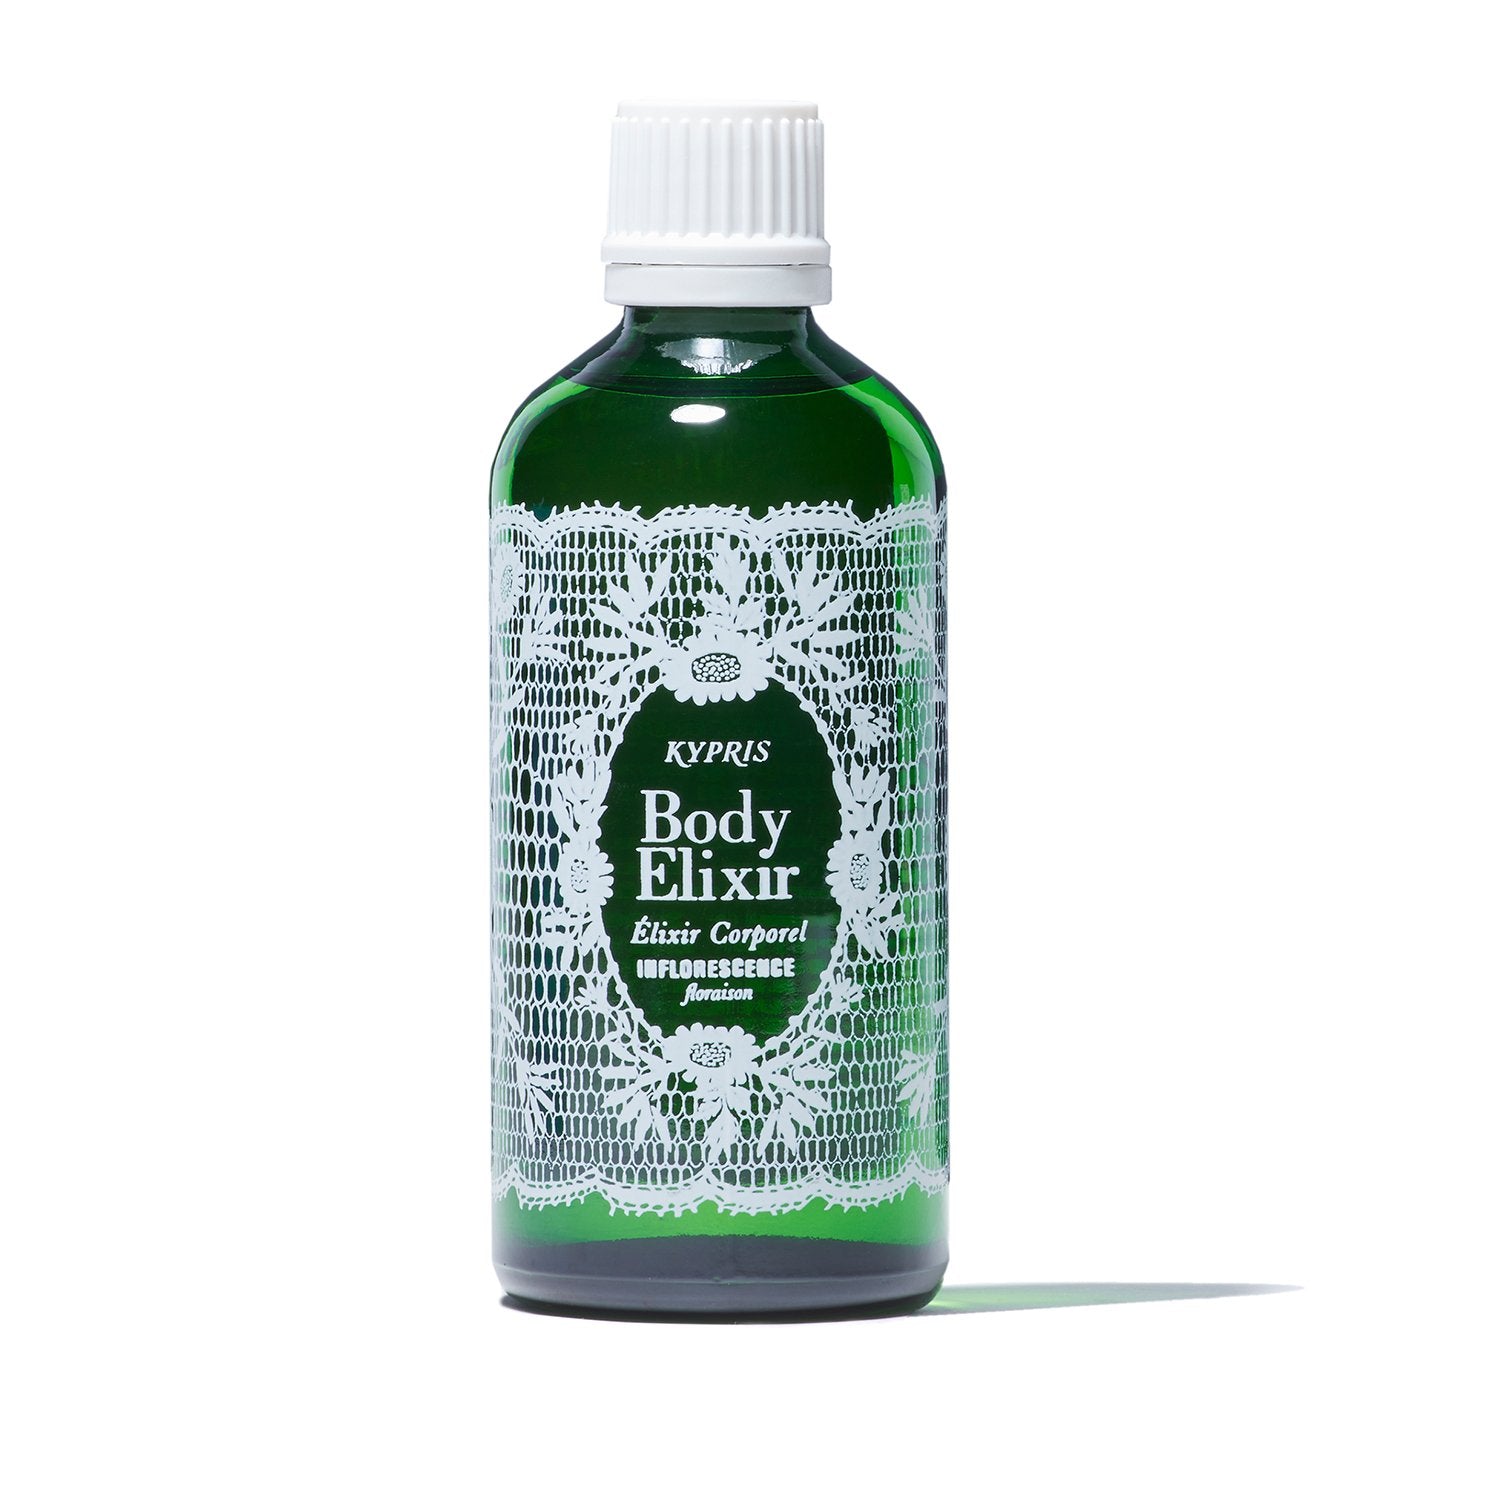 Body Elixir: Inflorescence body oil, in green glass bottle with white cap, on white white background.